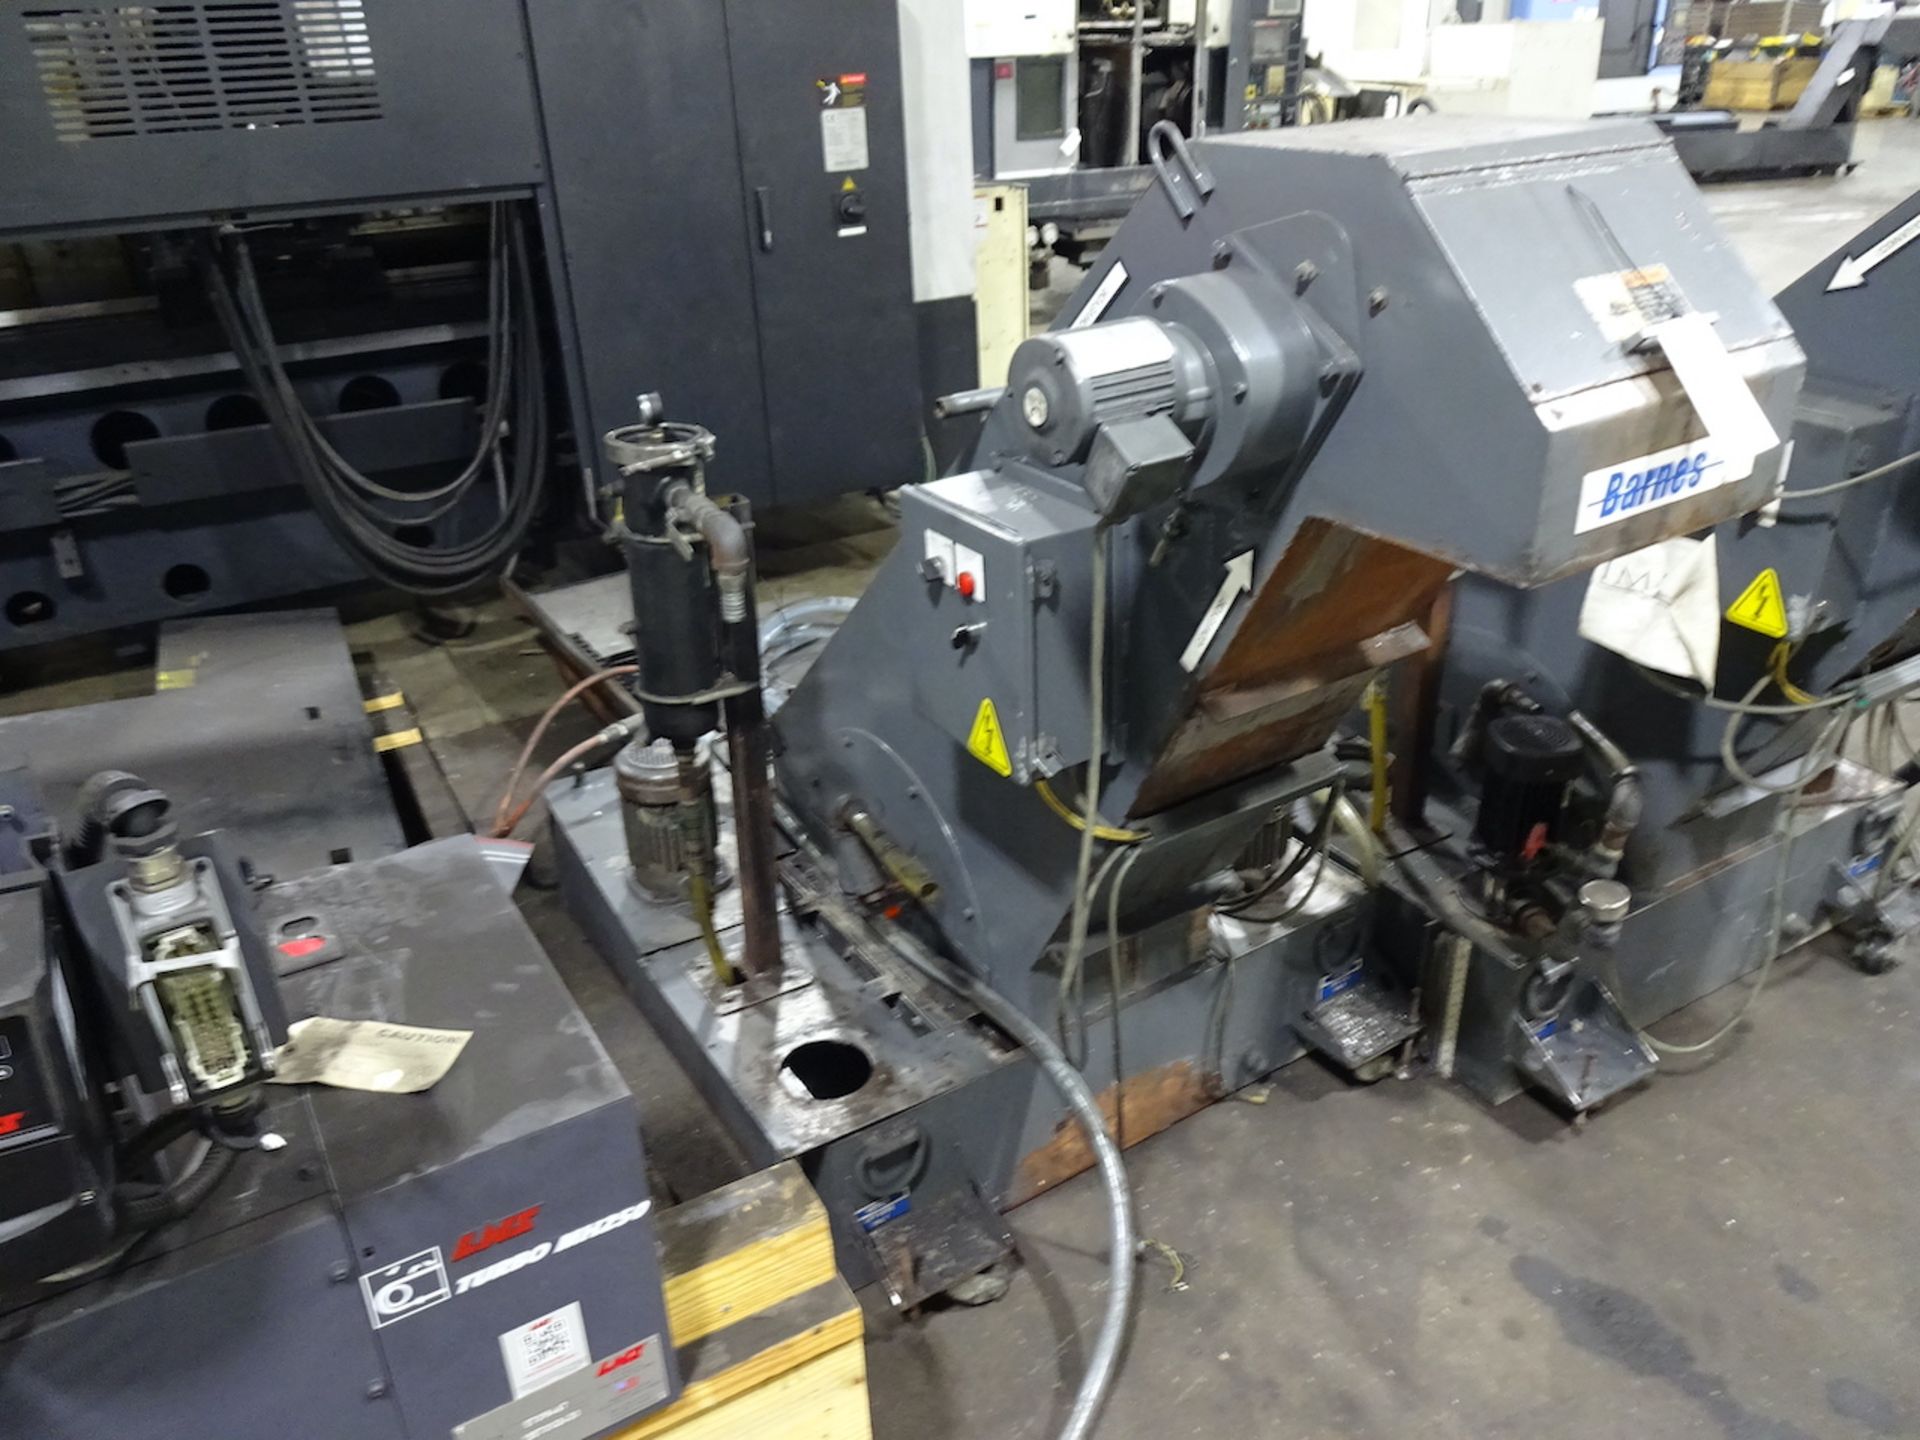 FUJI CSD-300 TWIN SPINDLE CNC LATHE (2014) S/N SE0102377, GANTRY LOAD AND STOCKER TABLE, RECOMMENDED - Image 20 of 25